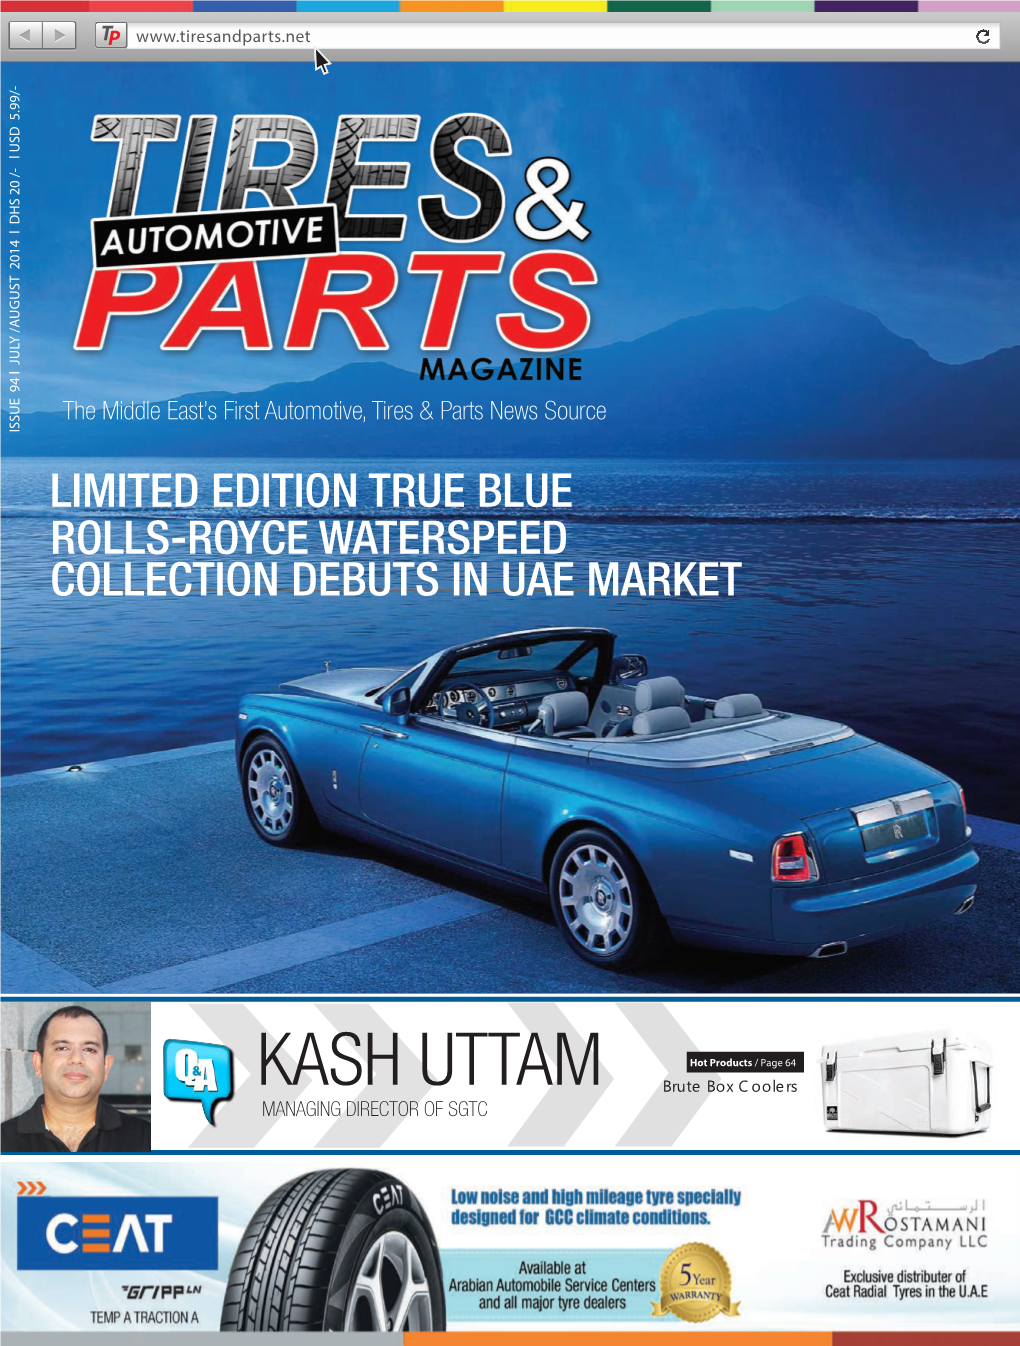 KASH UTTAM Brute Boxcoolers Hot Products/Page64 Bespoke Tires Specifically Designed and Produced for You